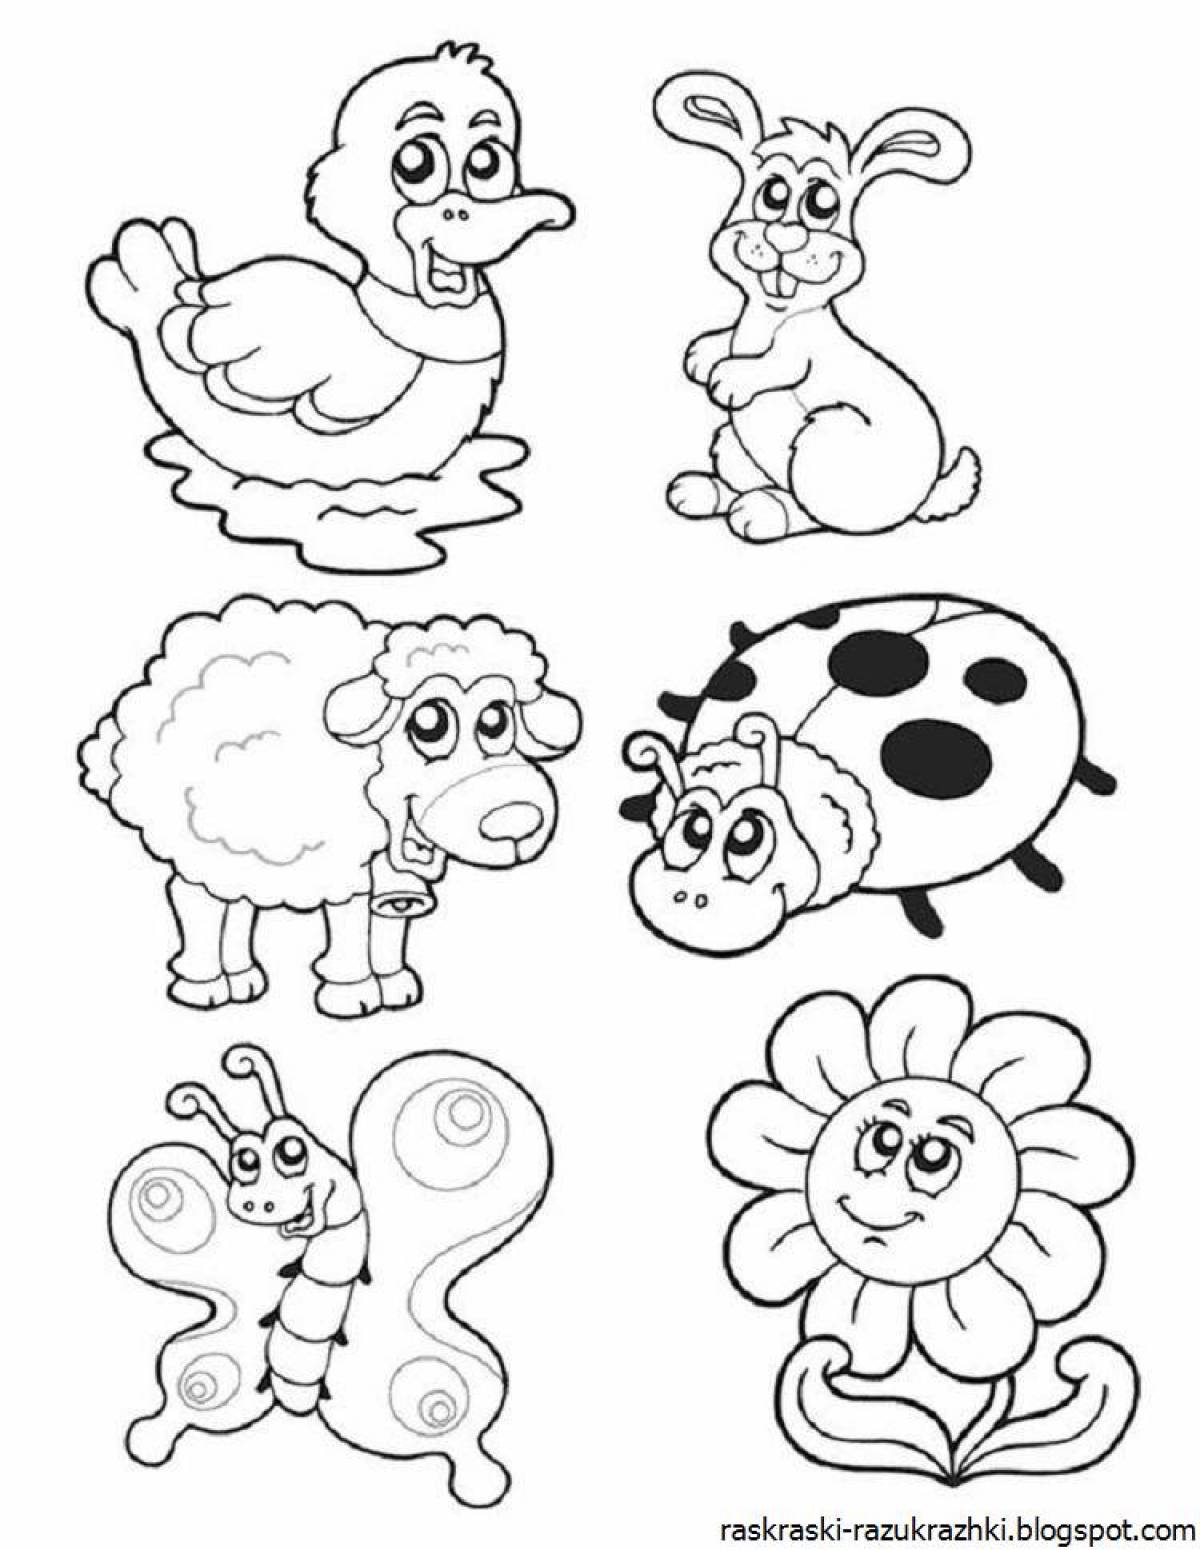 Colour coloring animals for children 6-7 years old